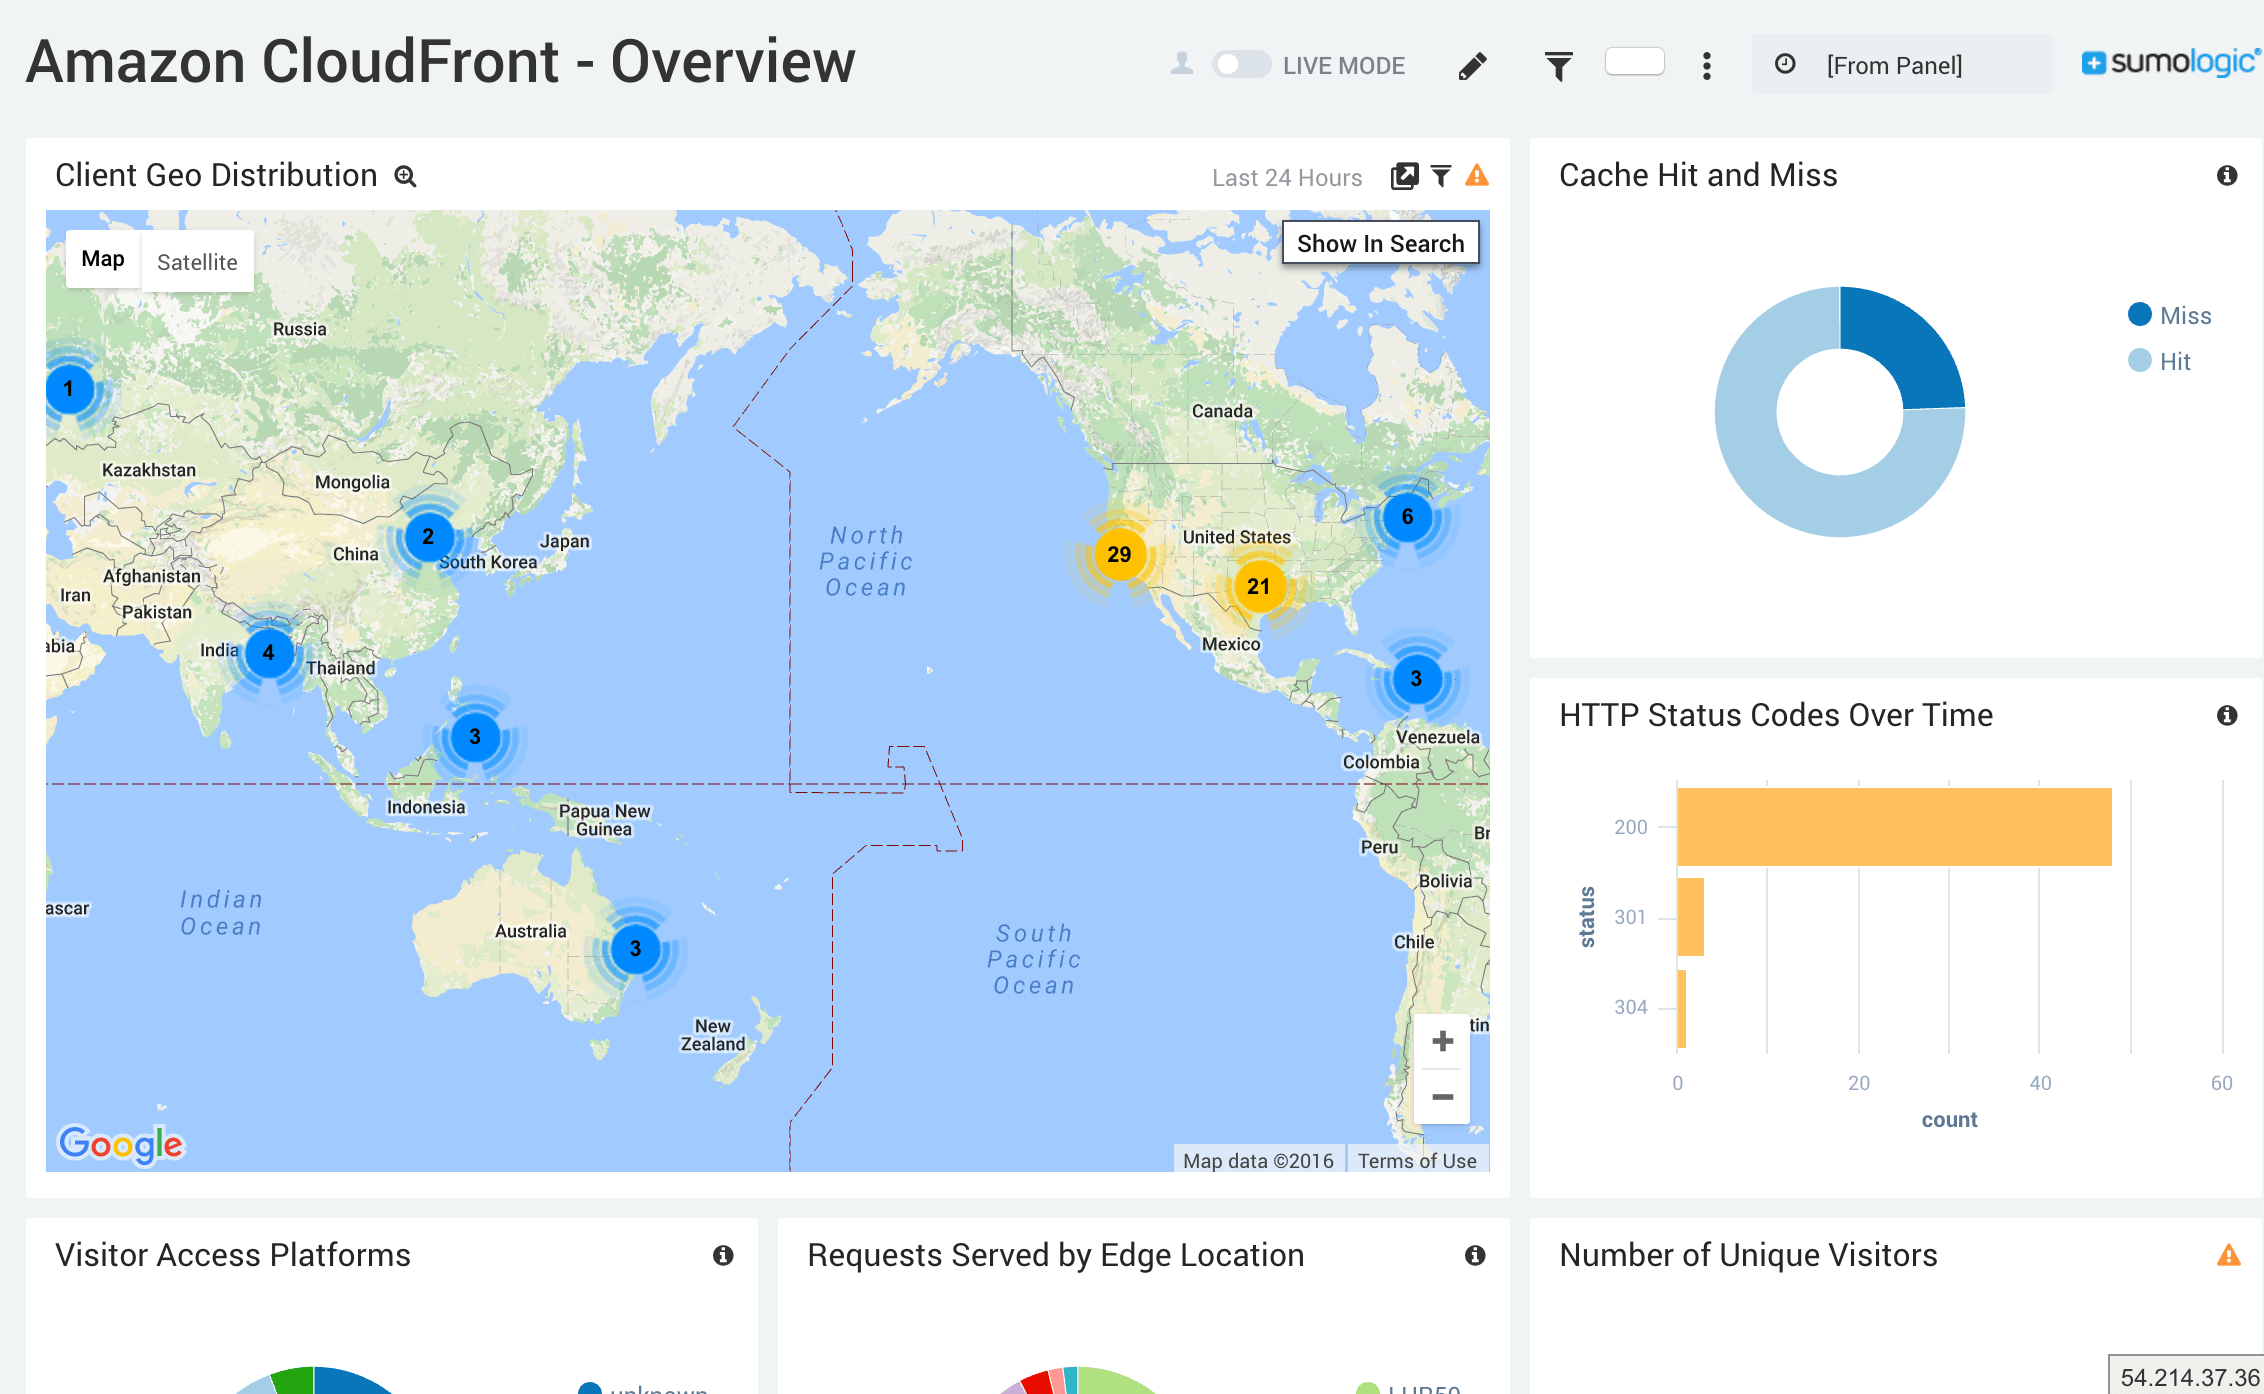 CloudFront Overview